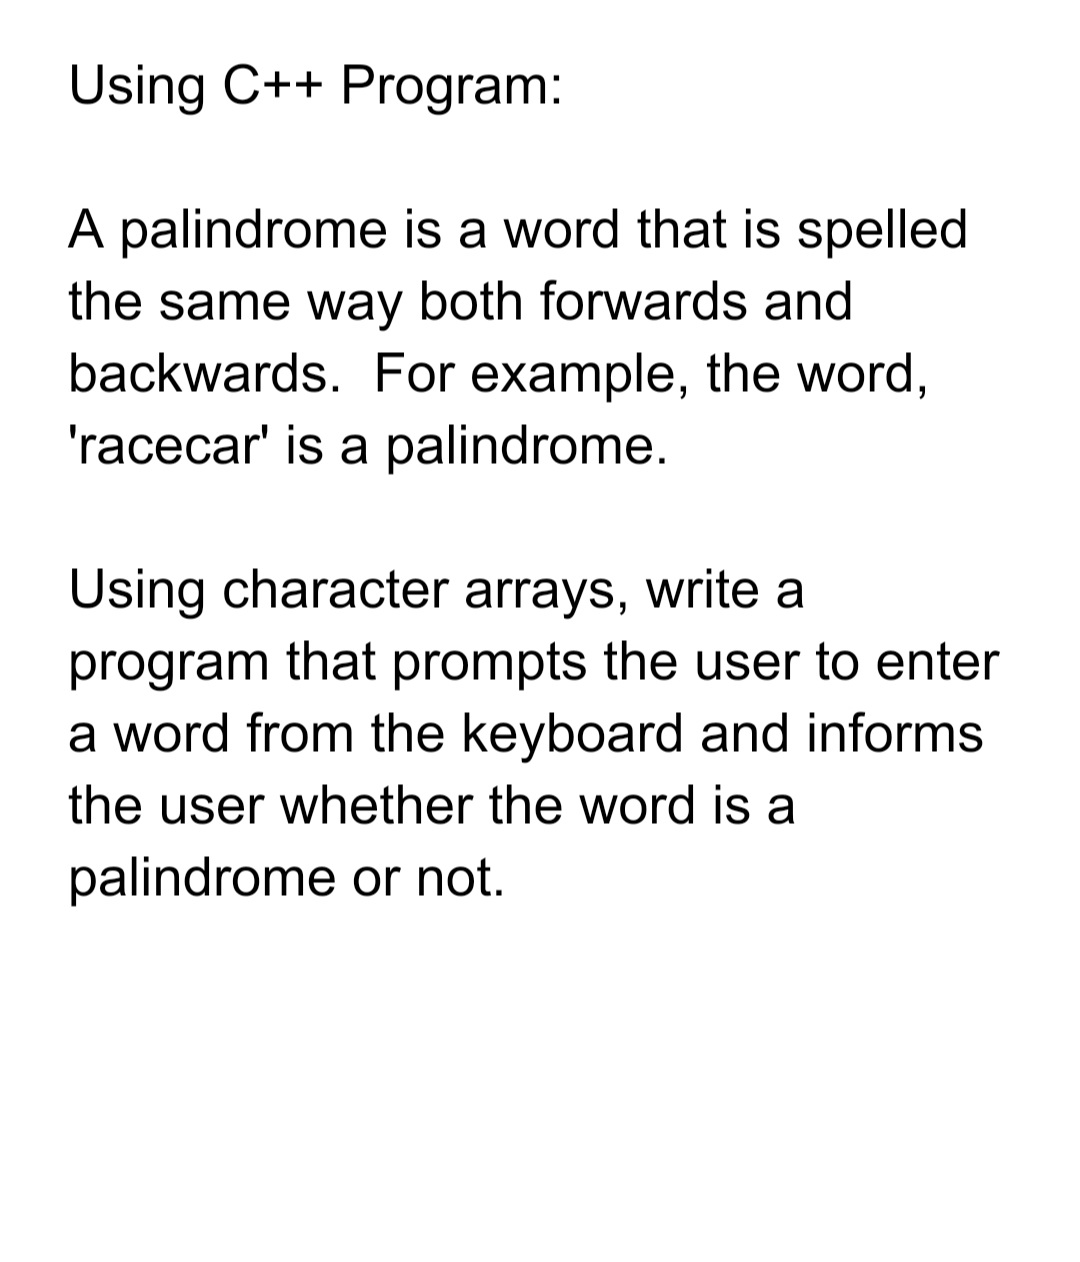 Using C++ Program:
A palindrome is a word that is spelled
the same way both forwards and
backwards. For example, the word,
'racecar' is a palindrome.
Using character arrays, write a
program that prompts the user to enter
a word from the keyboard and informs
the user whether the word is a
palindrome or not.
